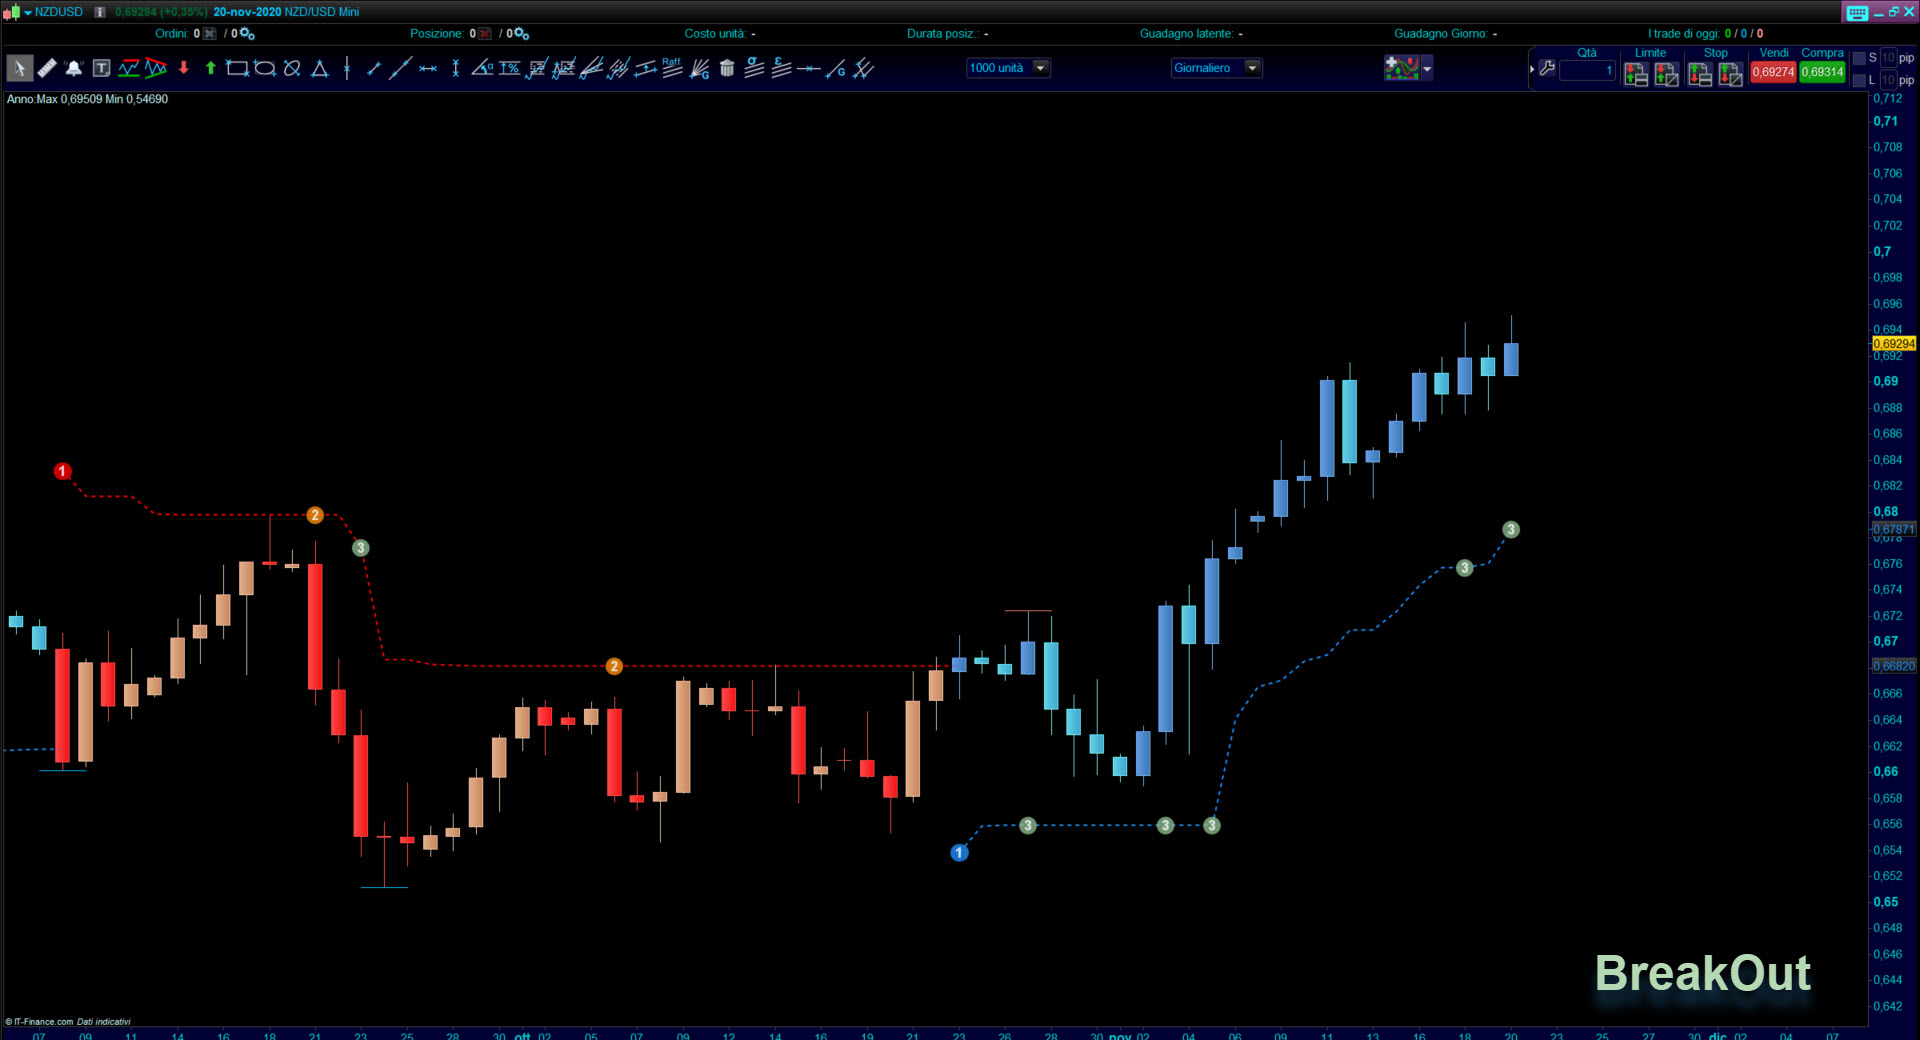 Trend Trading System Screener www.automatictrading.it BreakOut